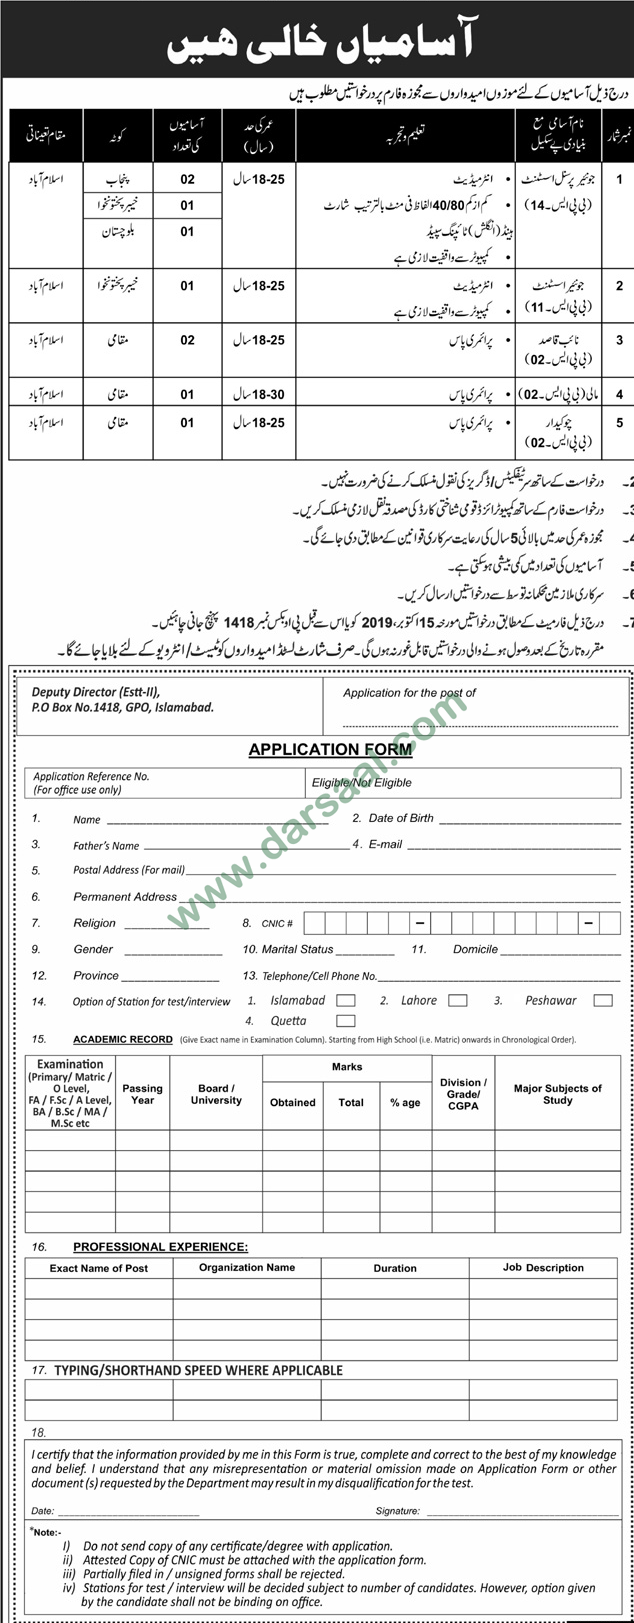 Naib Qasid Jobs in Government Departments in Lahore - Sep 29, 2019